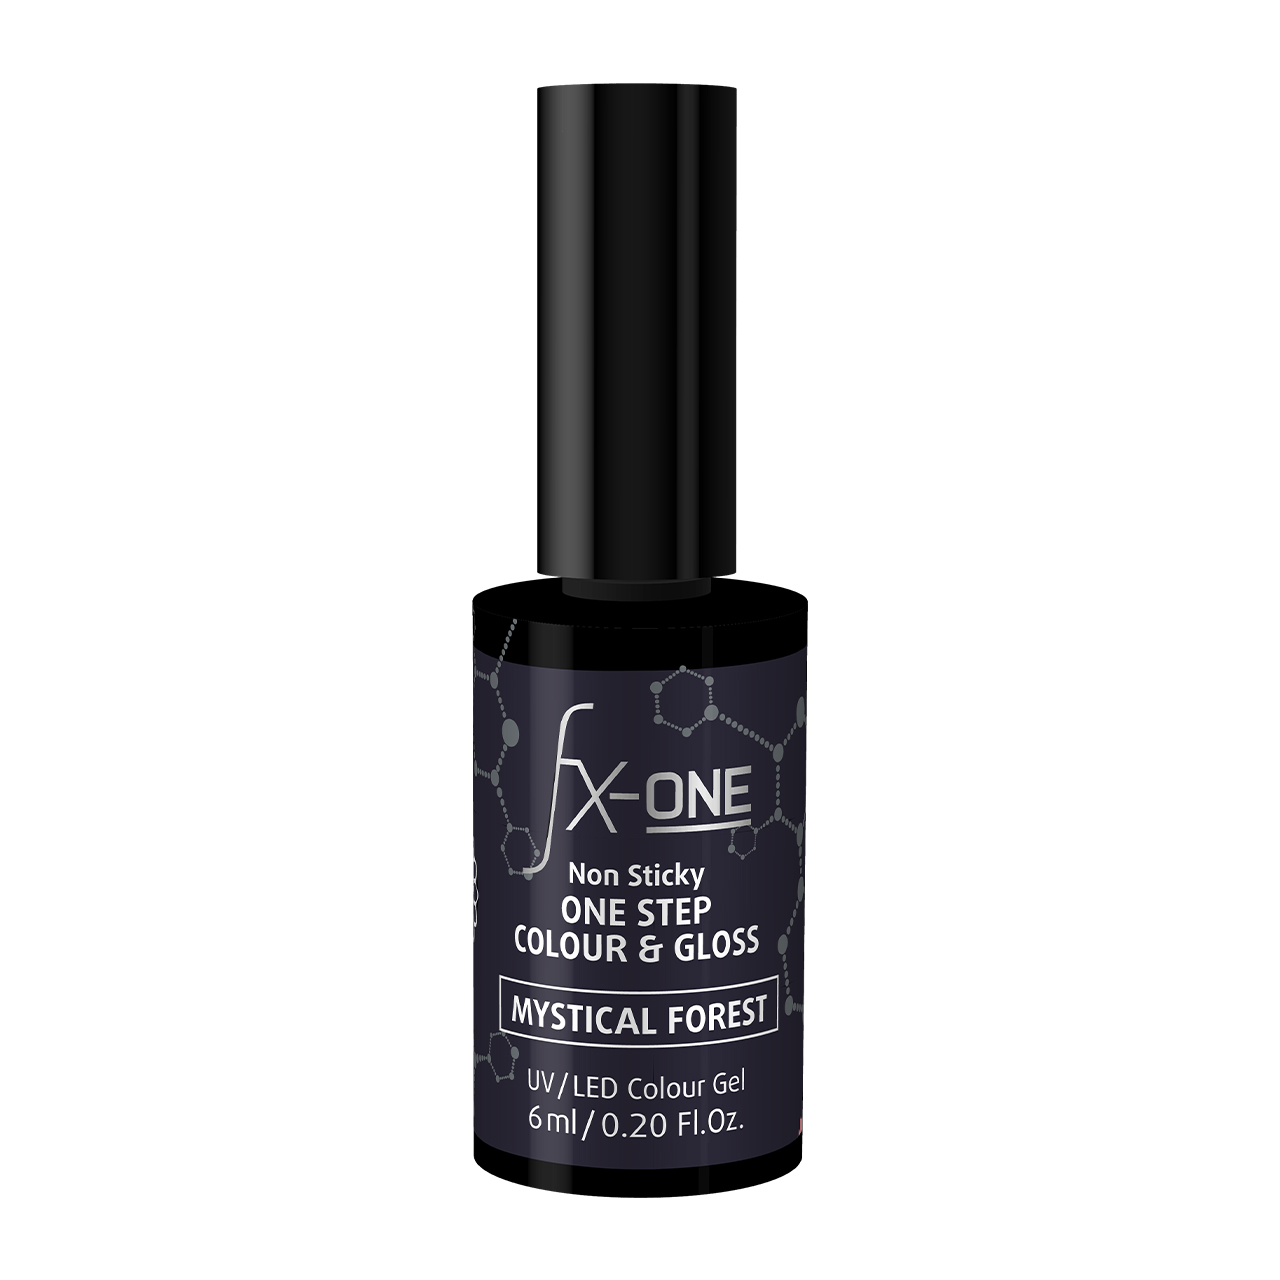 FX ONE Colour & Gloss Mystical Forest